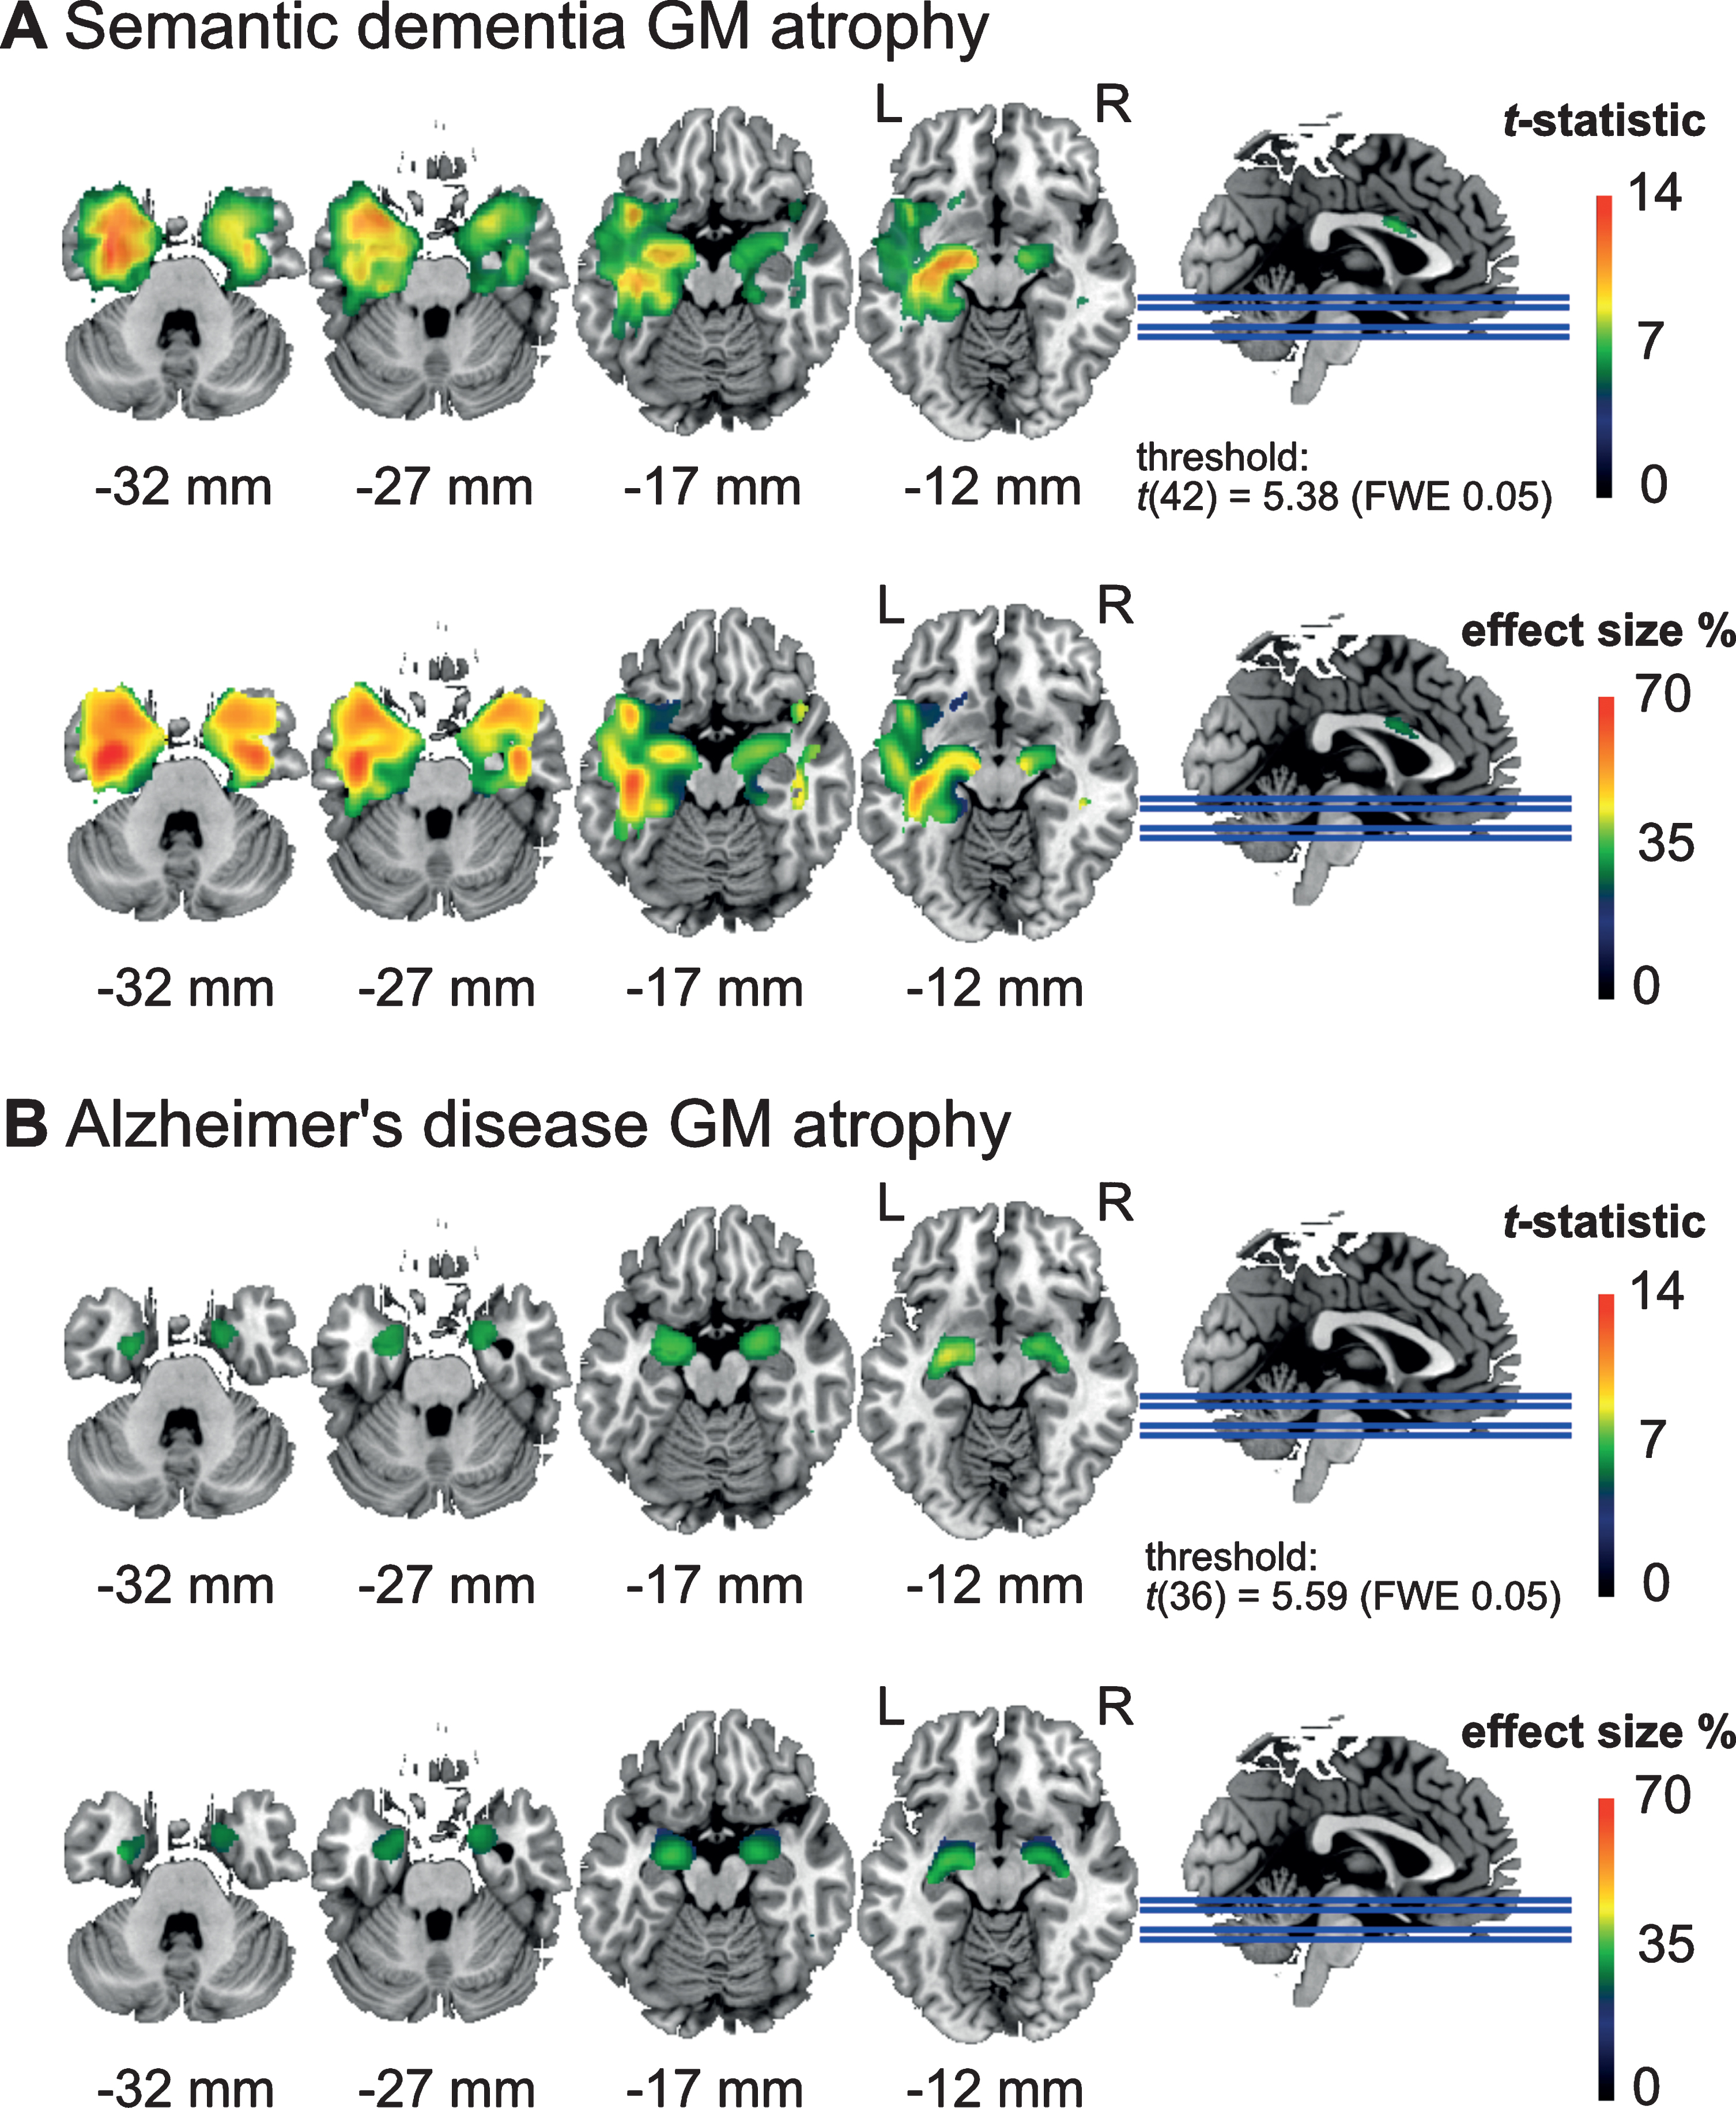 Areas with significantly lower (voxel-level) gray matter (GM) density (top) and effect size in terms of percentage GM reduction (bottom) in (A) the semantic dementia (SD) patients (n = 24) and (B) Alzheimer’s disease (AD) patients (n = 18) compared to the healthy elderly control group (n = 20). SD patients showed reduced GM density in widespread areas of the left anterior temporal cortex including the temporal pole, while the AD patients showed reduced GM density in the amygdala. SD patients showed more severe GM loss with up to 70% reduction, and AD patients with up to 40% reduction in some areas.